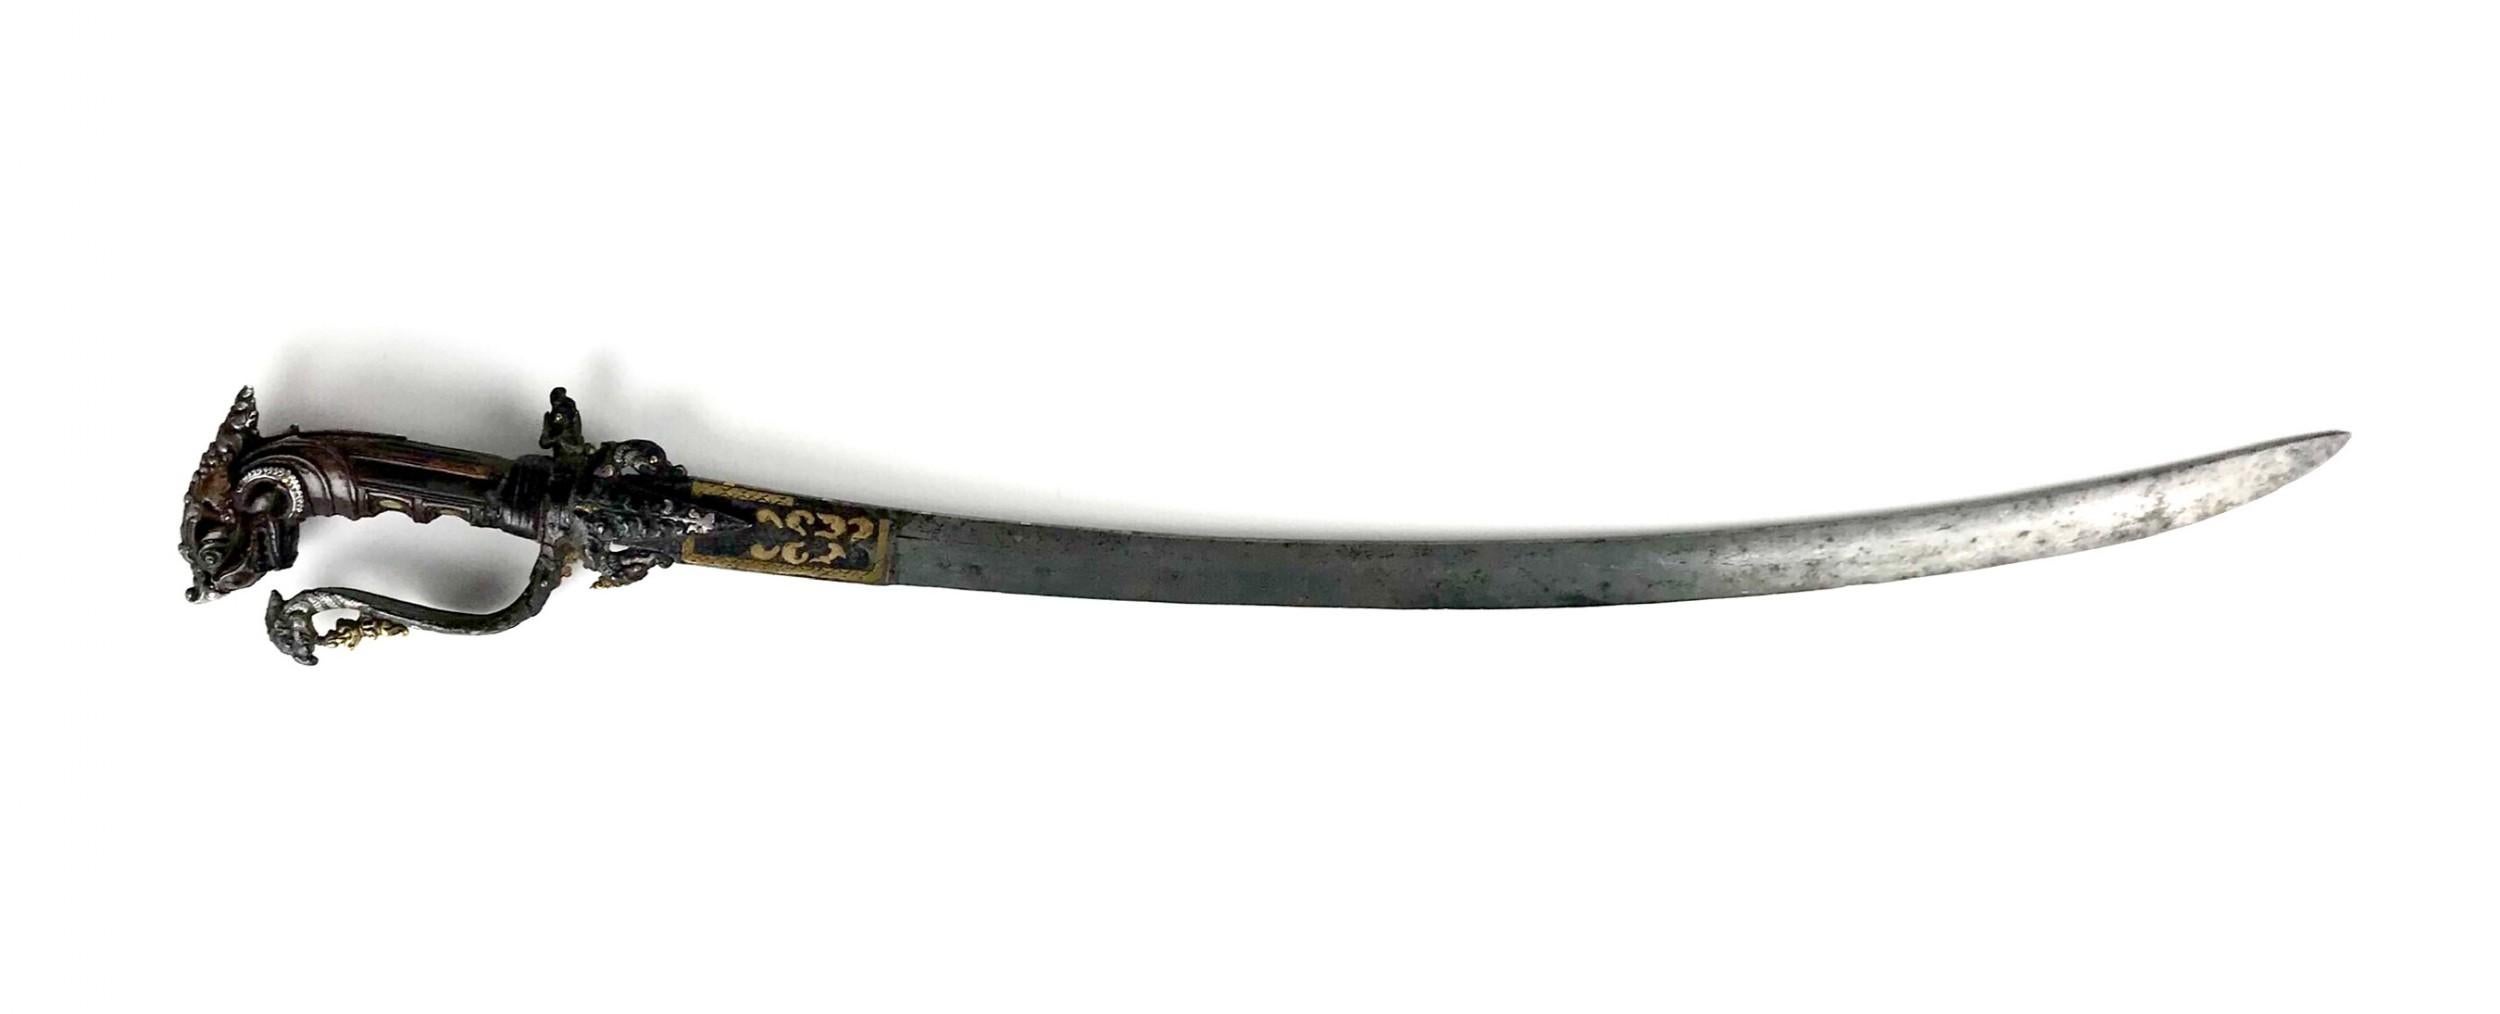 A magnificent 17th century Ceremonial Sri Lankan Kastane sword with Rhino handle and gold and silver Portuguese inlayed blade.
A kasthane is a short traditional ceremonial or decorative single-edged Sri Lankan sword. The sword is featured in the